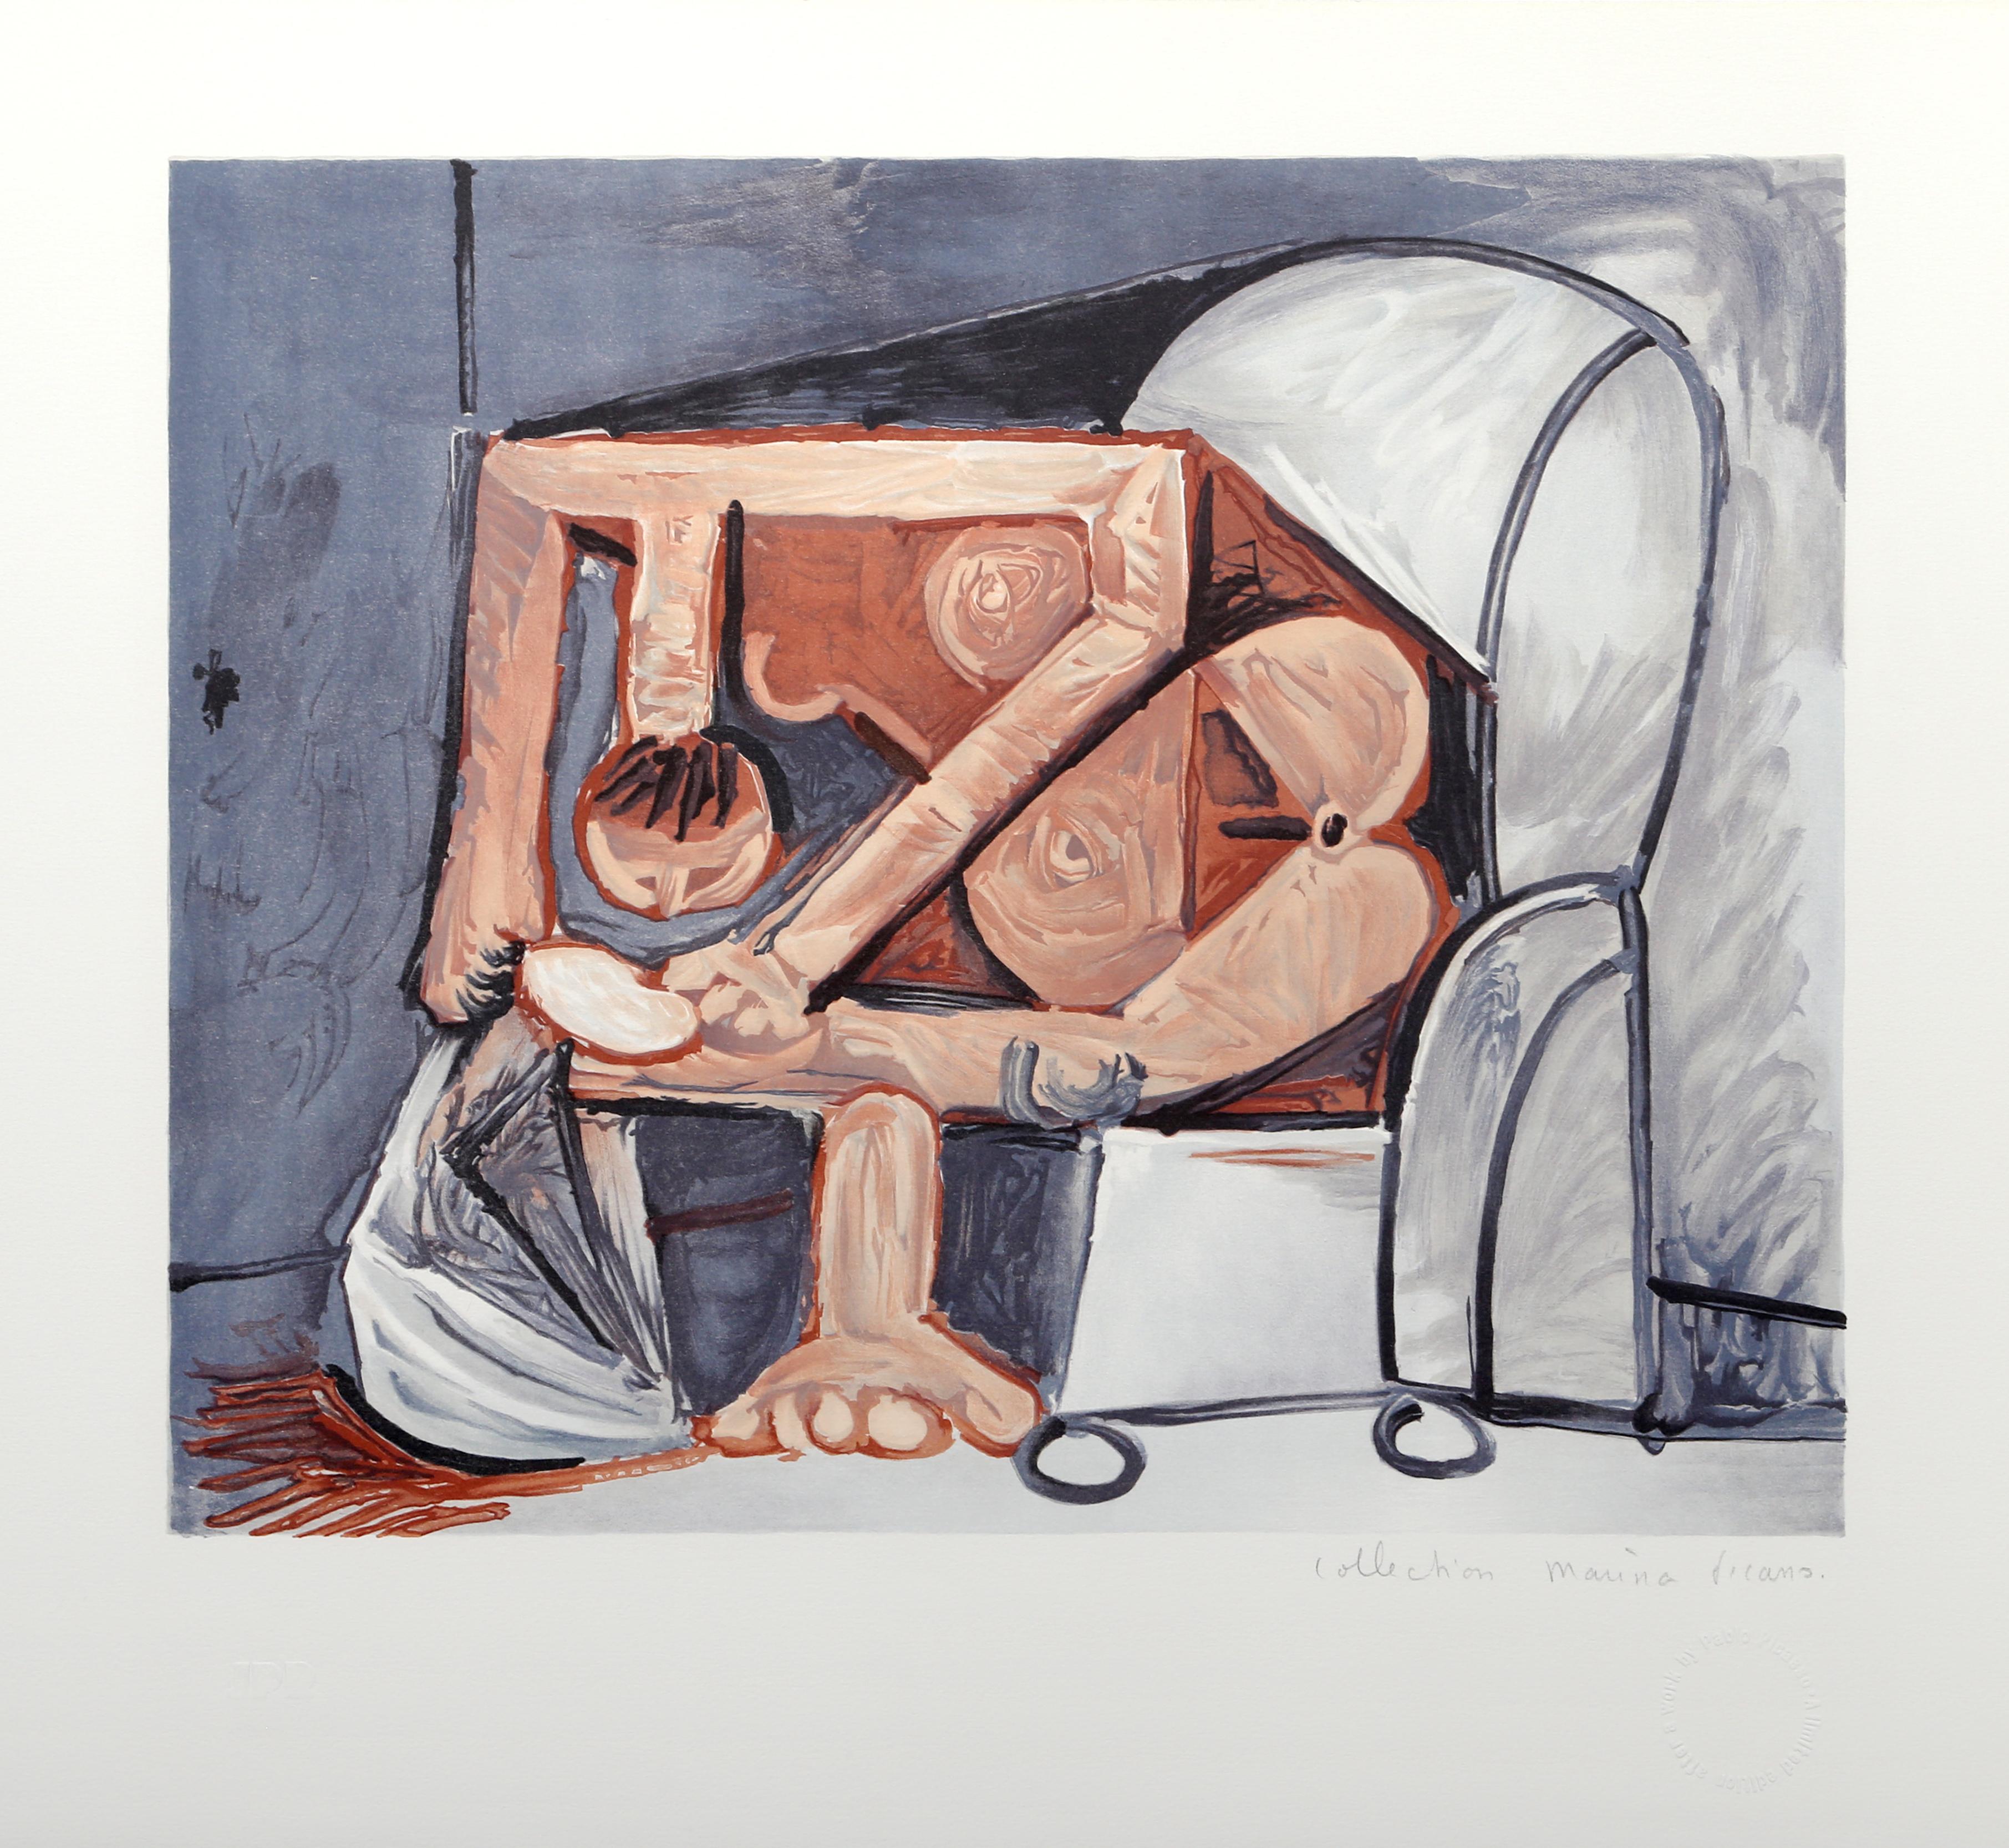 In this Pablo Picasso print, the artist has depicted a nude figure sitting in a plush chair, slumping forward to rest its elbows on its knees. Lacking any specific detail, this work is a classic example of Cubism for its emphasis on color and shape